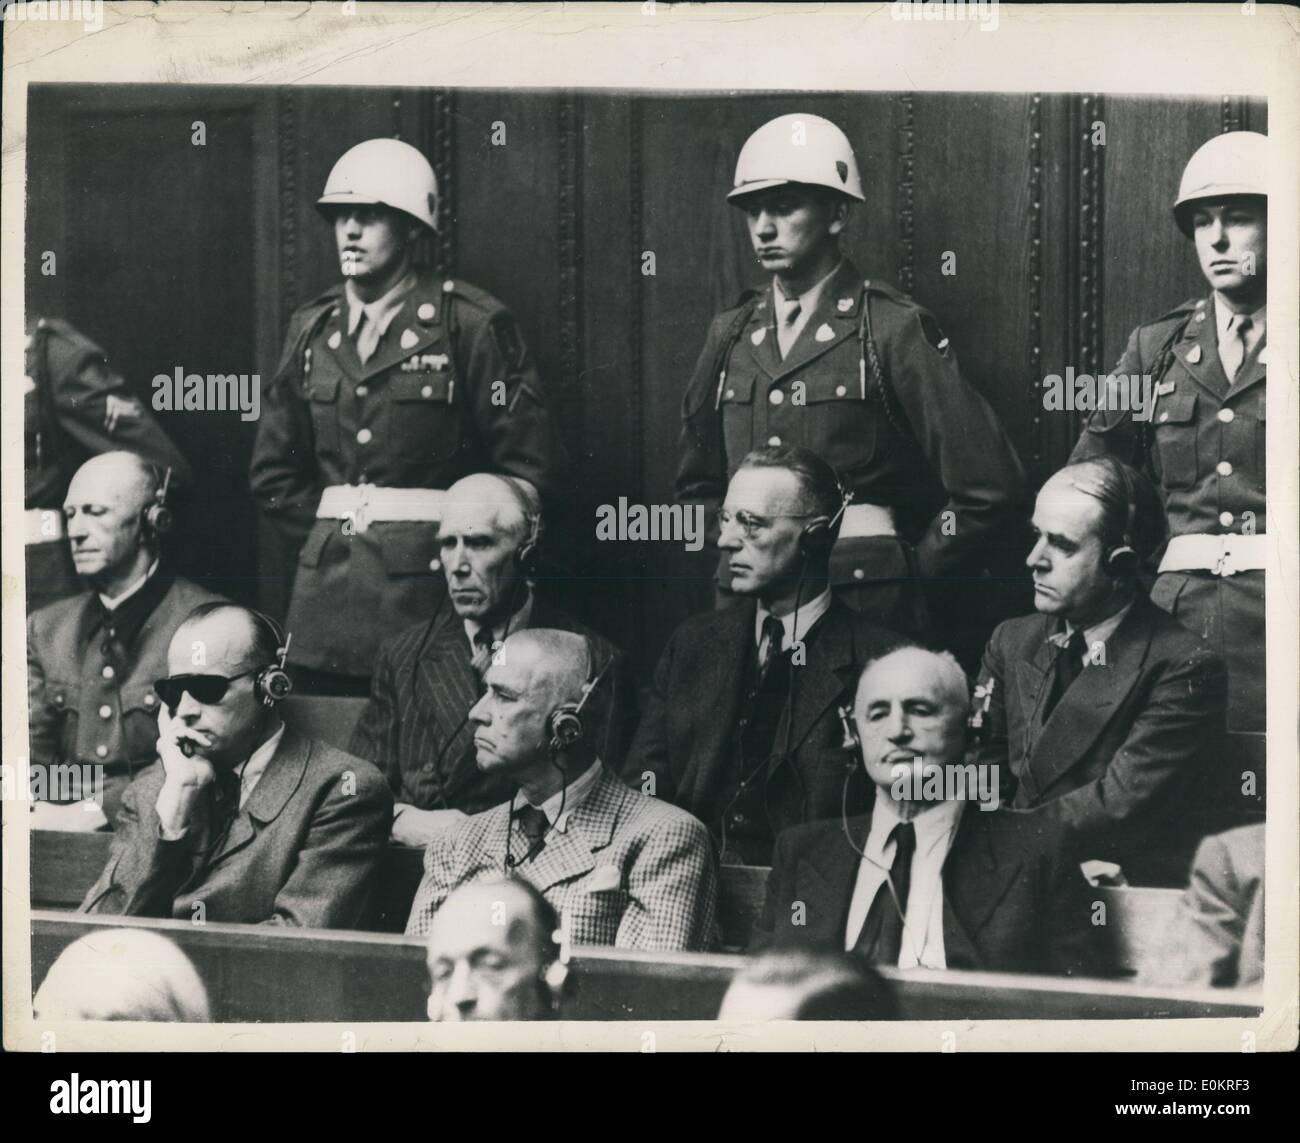 Sep. 09, 1946 - Judgement Day At Nuremberg Defendants Hear Verdict: Some of the chief defendants seen in the dock at Nuremberg Back now Left to Right Alfred Jodl, Franz Von Papen; Arthur Seys - Inquart; Albert Spee. Front row Left to Right Erich Raeder; Wilhelm Frick and Julius Streicher.. They are listening to the verdict during the final stages of the greatest trial in history. Stock Photo